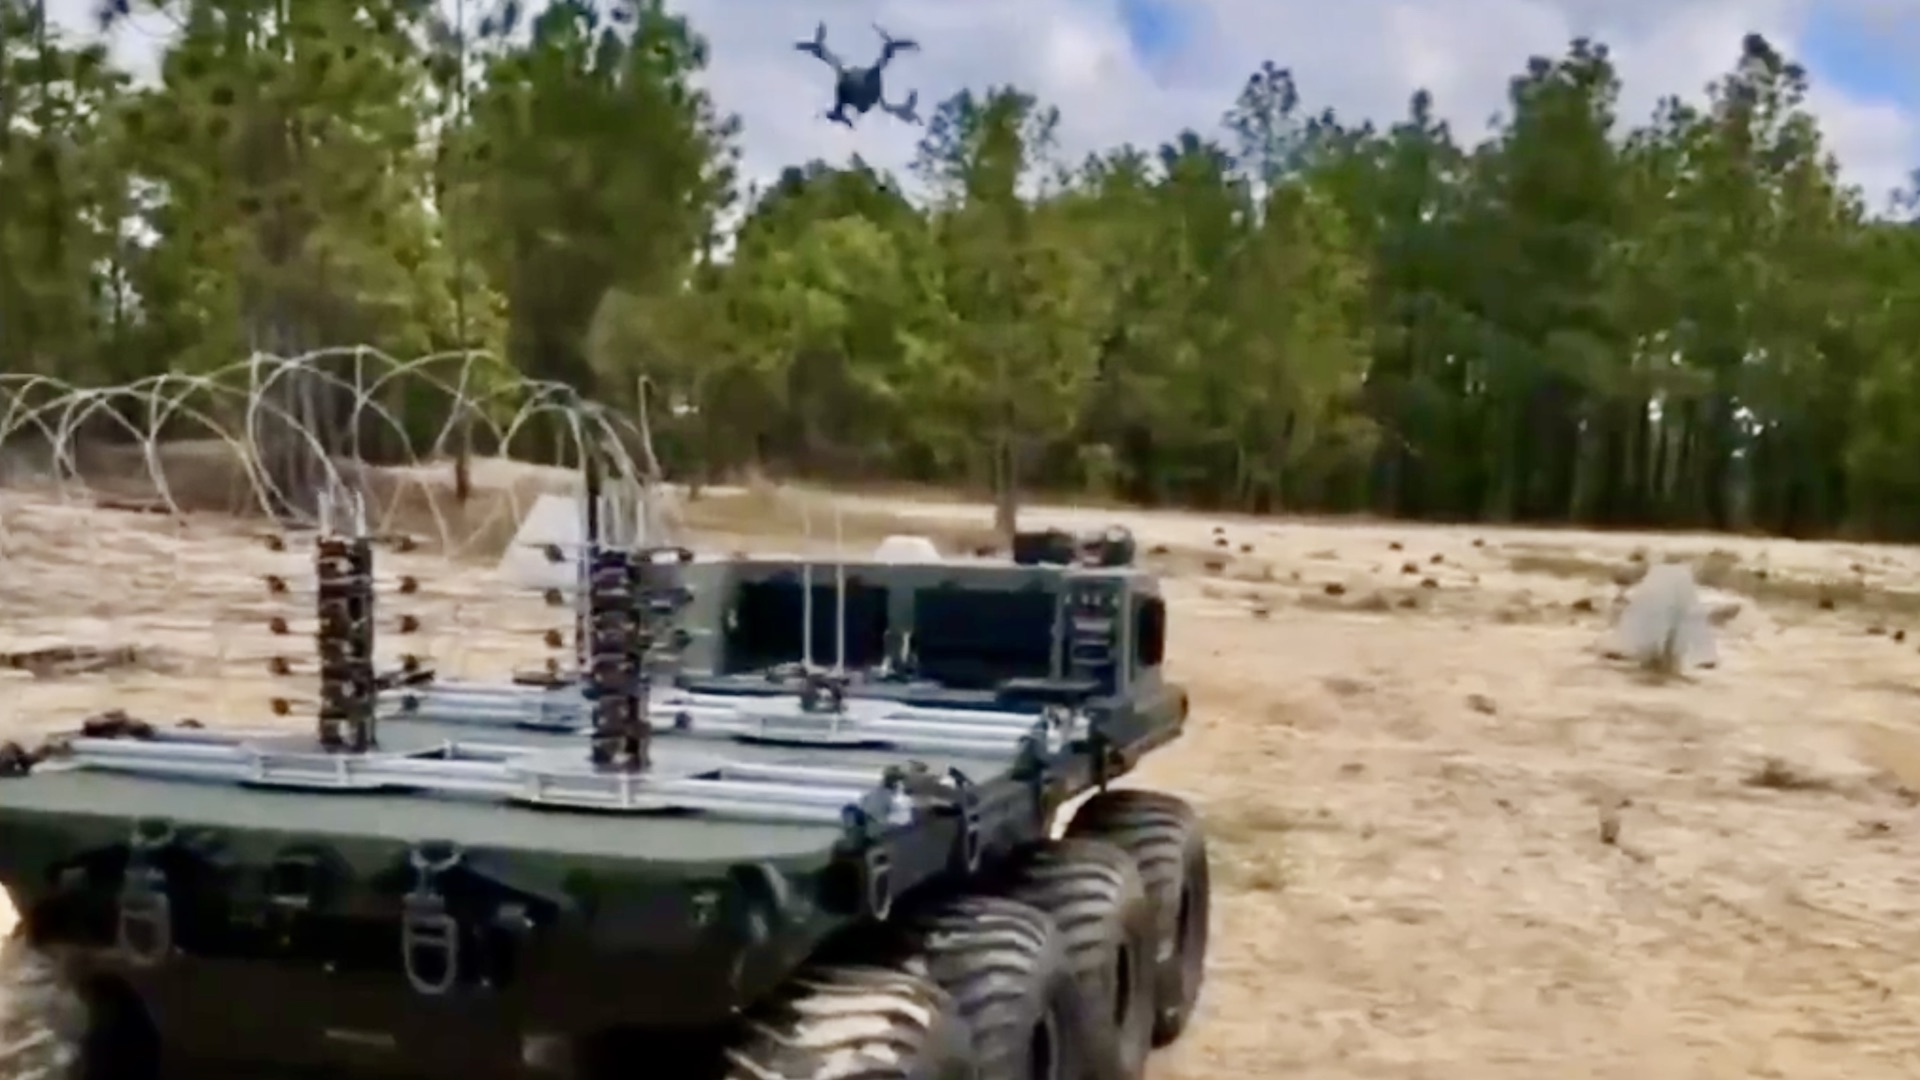 An uncrewed ground vehicle launching quadcopter